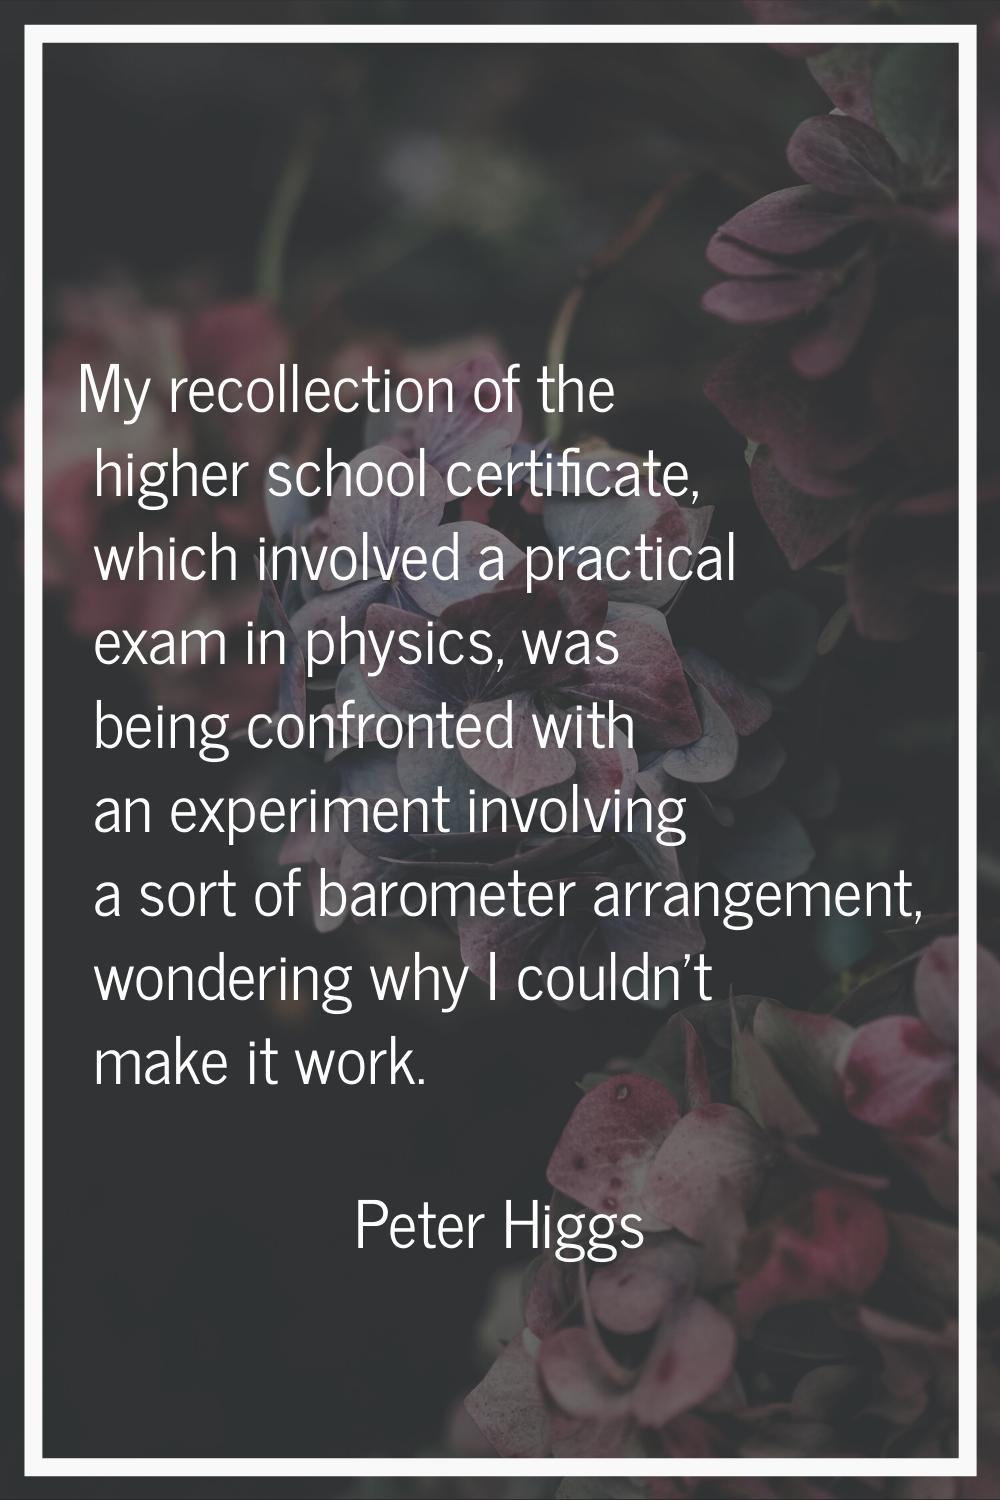 My recollection of the higher school certificate, which involved a practical exam in physics, was b